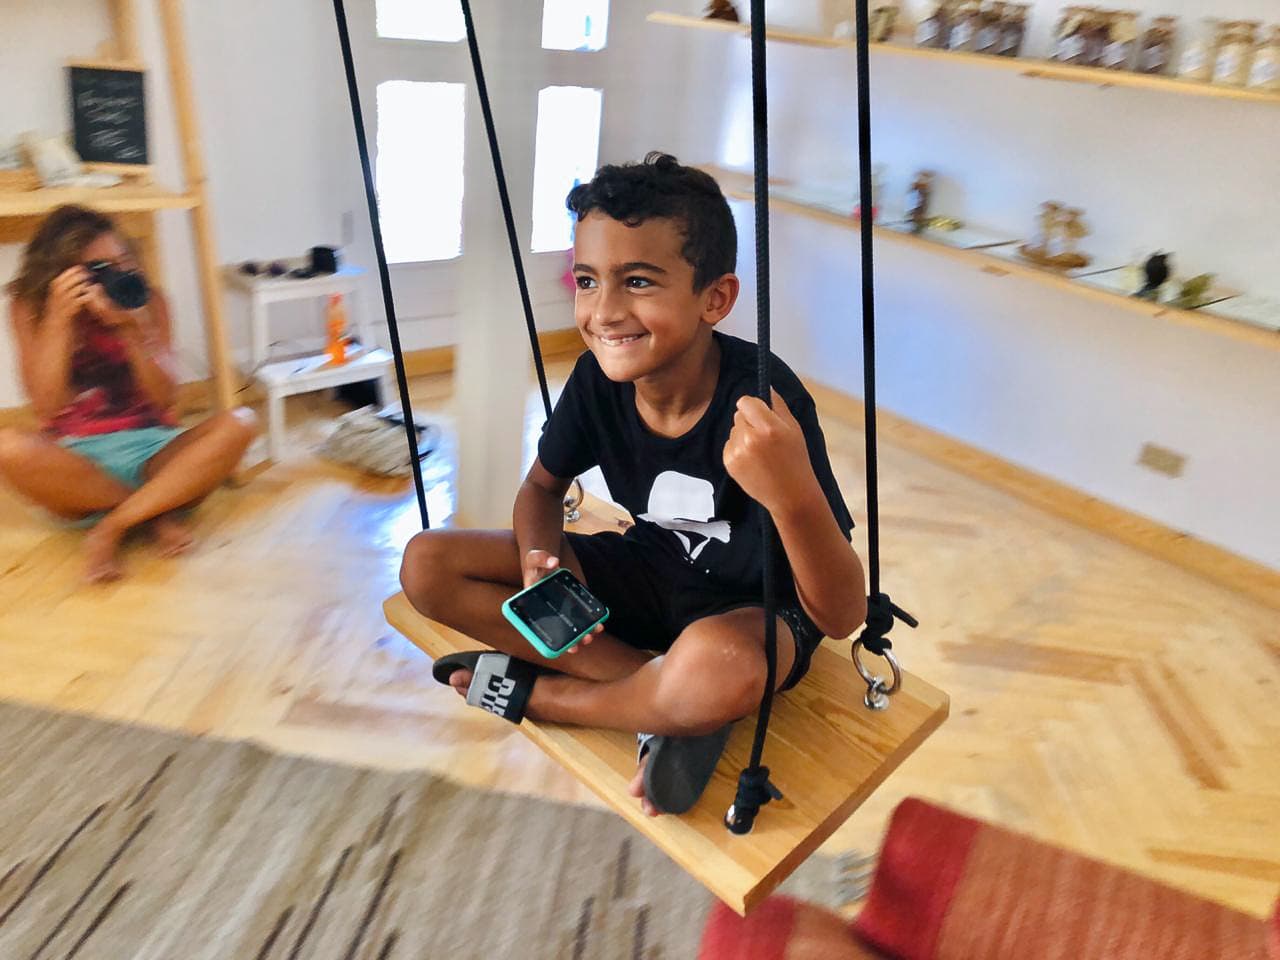 Photograph of a boy smiling on an indoor swing